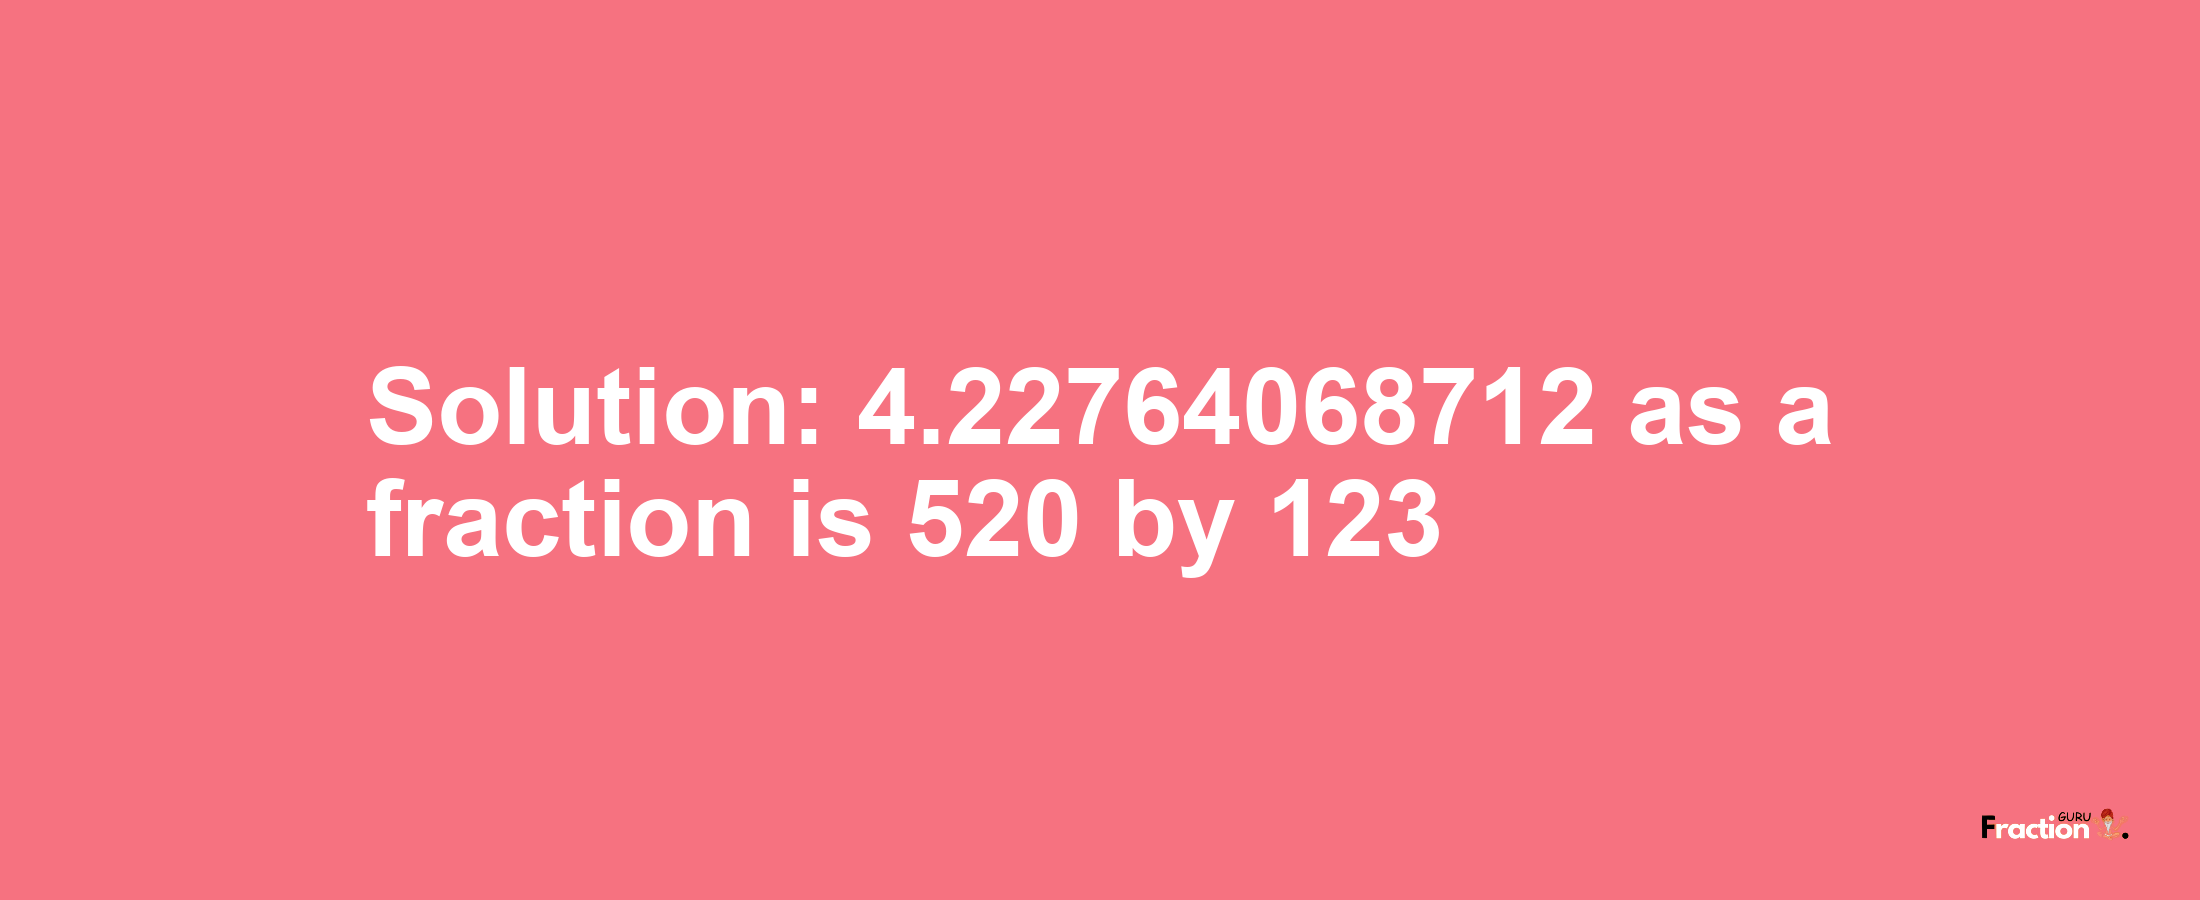 Solution:4.22764068712 as a fraction is 520/123